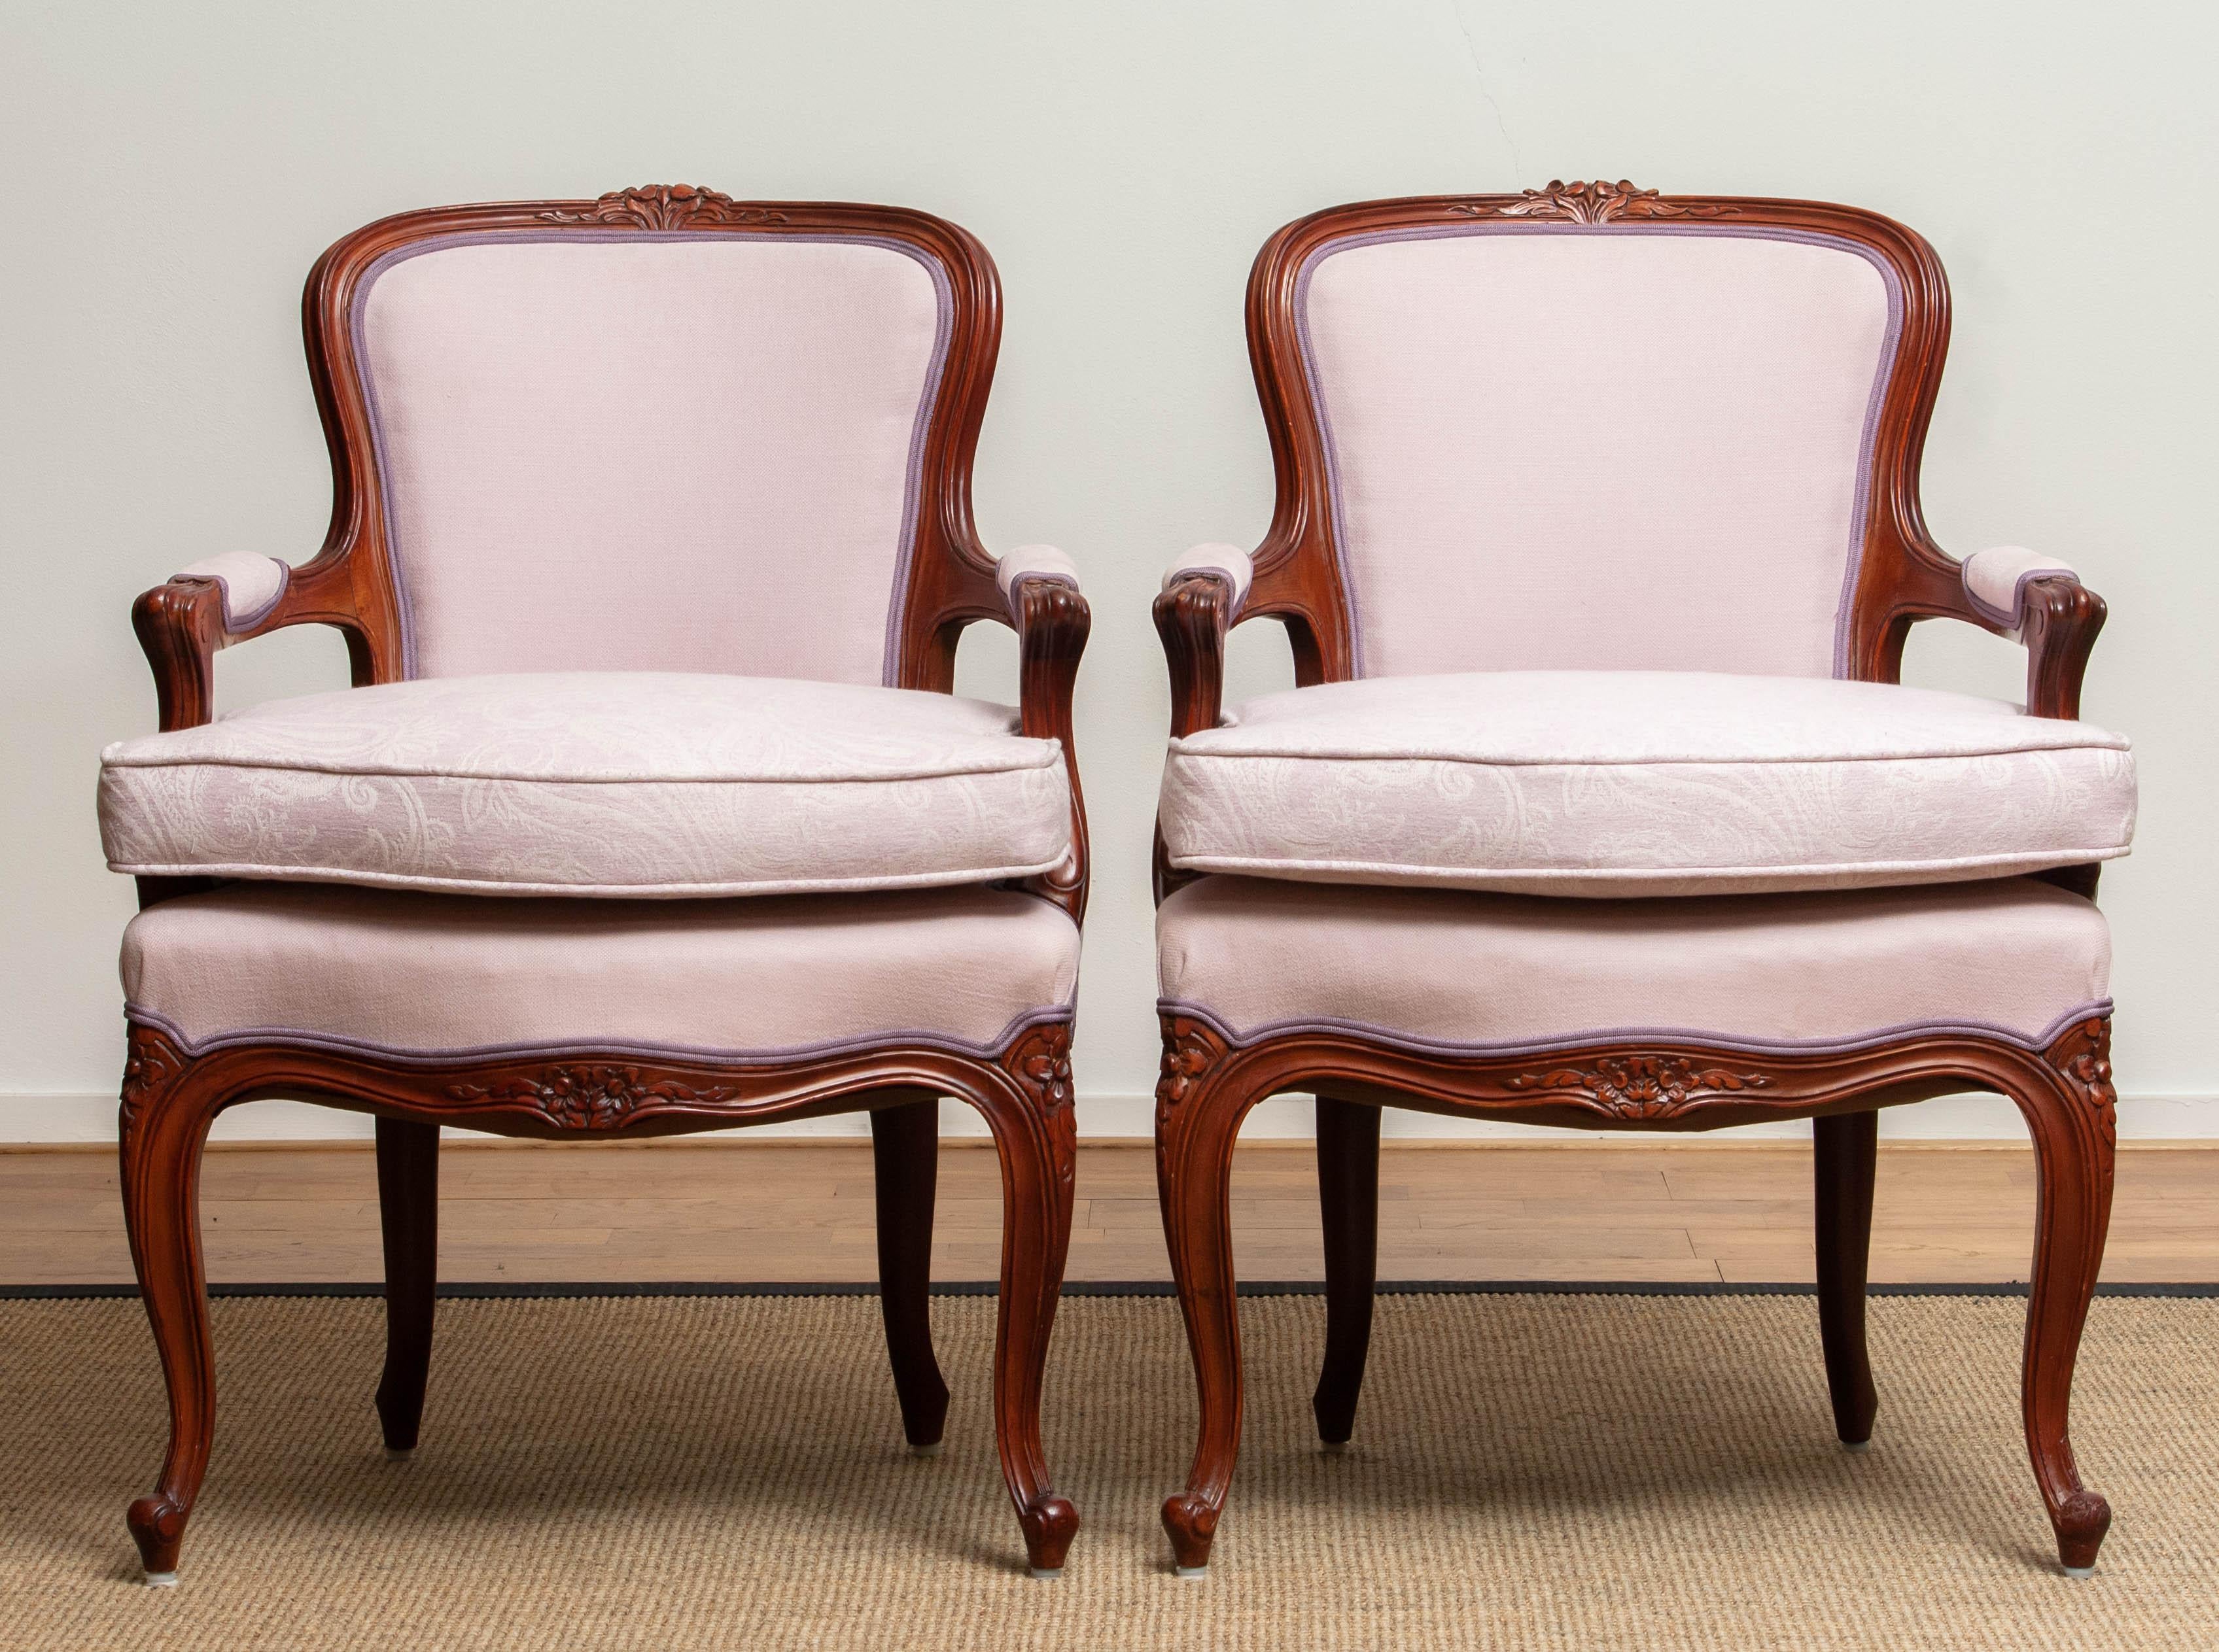 1950s, Pair of Pink Swedish Rococo Bergères in the Shabby Chic Technique Chairs 7